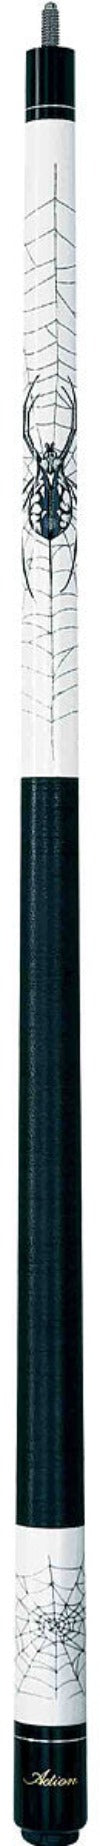 Action ADV114 Pool Cue